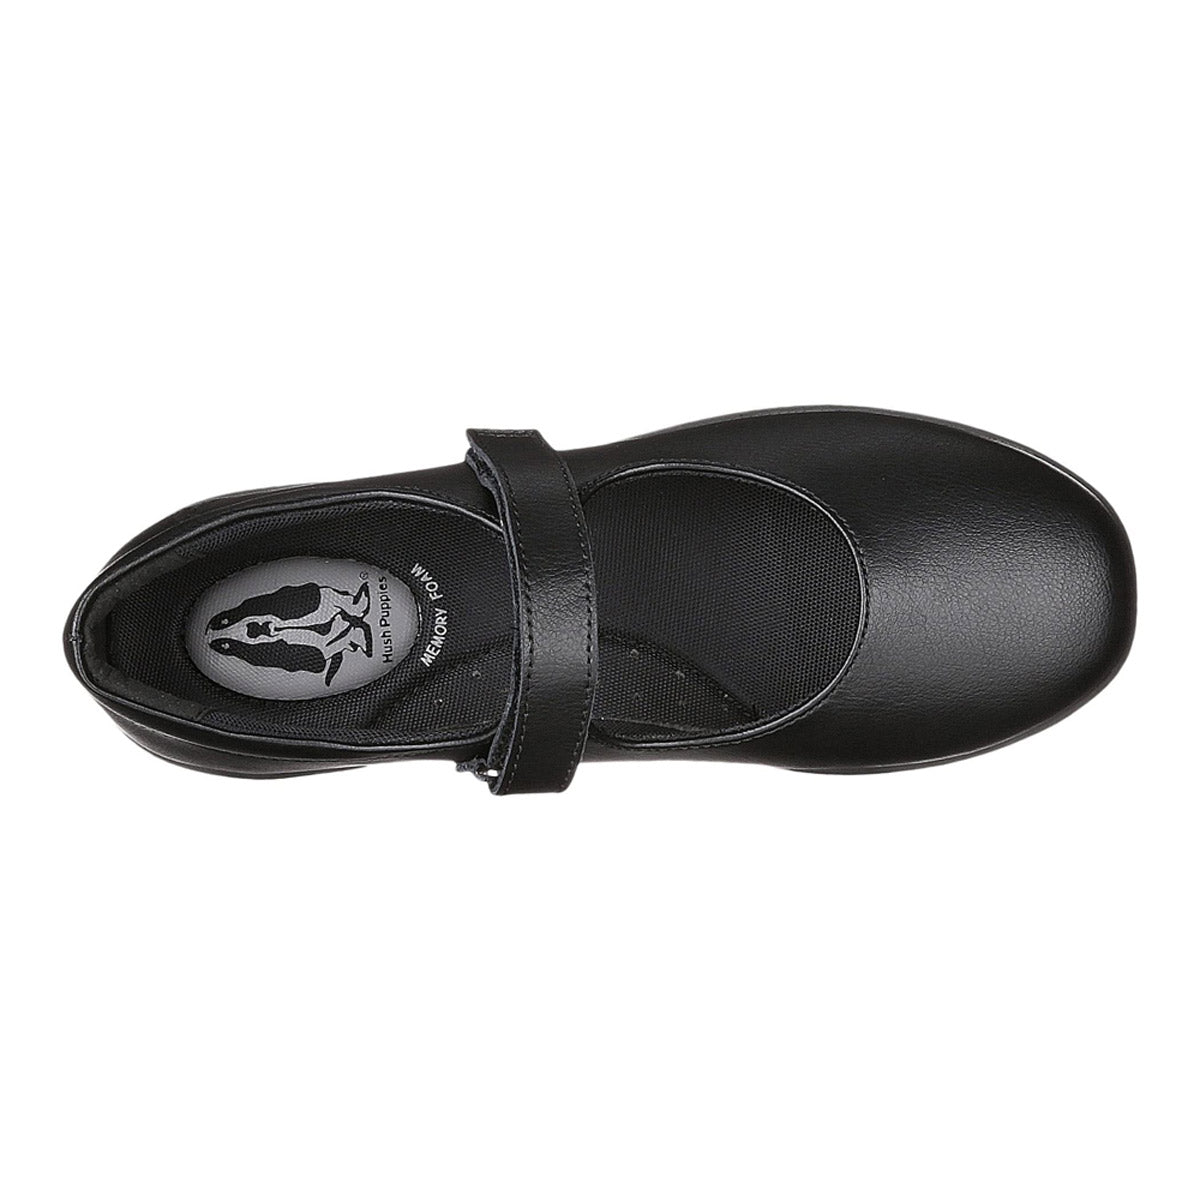 Top view of a black Hush Puppies Lexi mary jane style school uniform shoe with a single strap and a memory foam footbed insole.